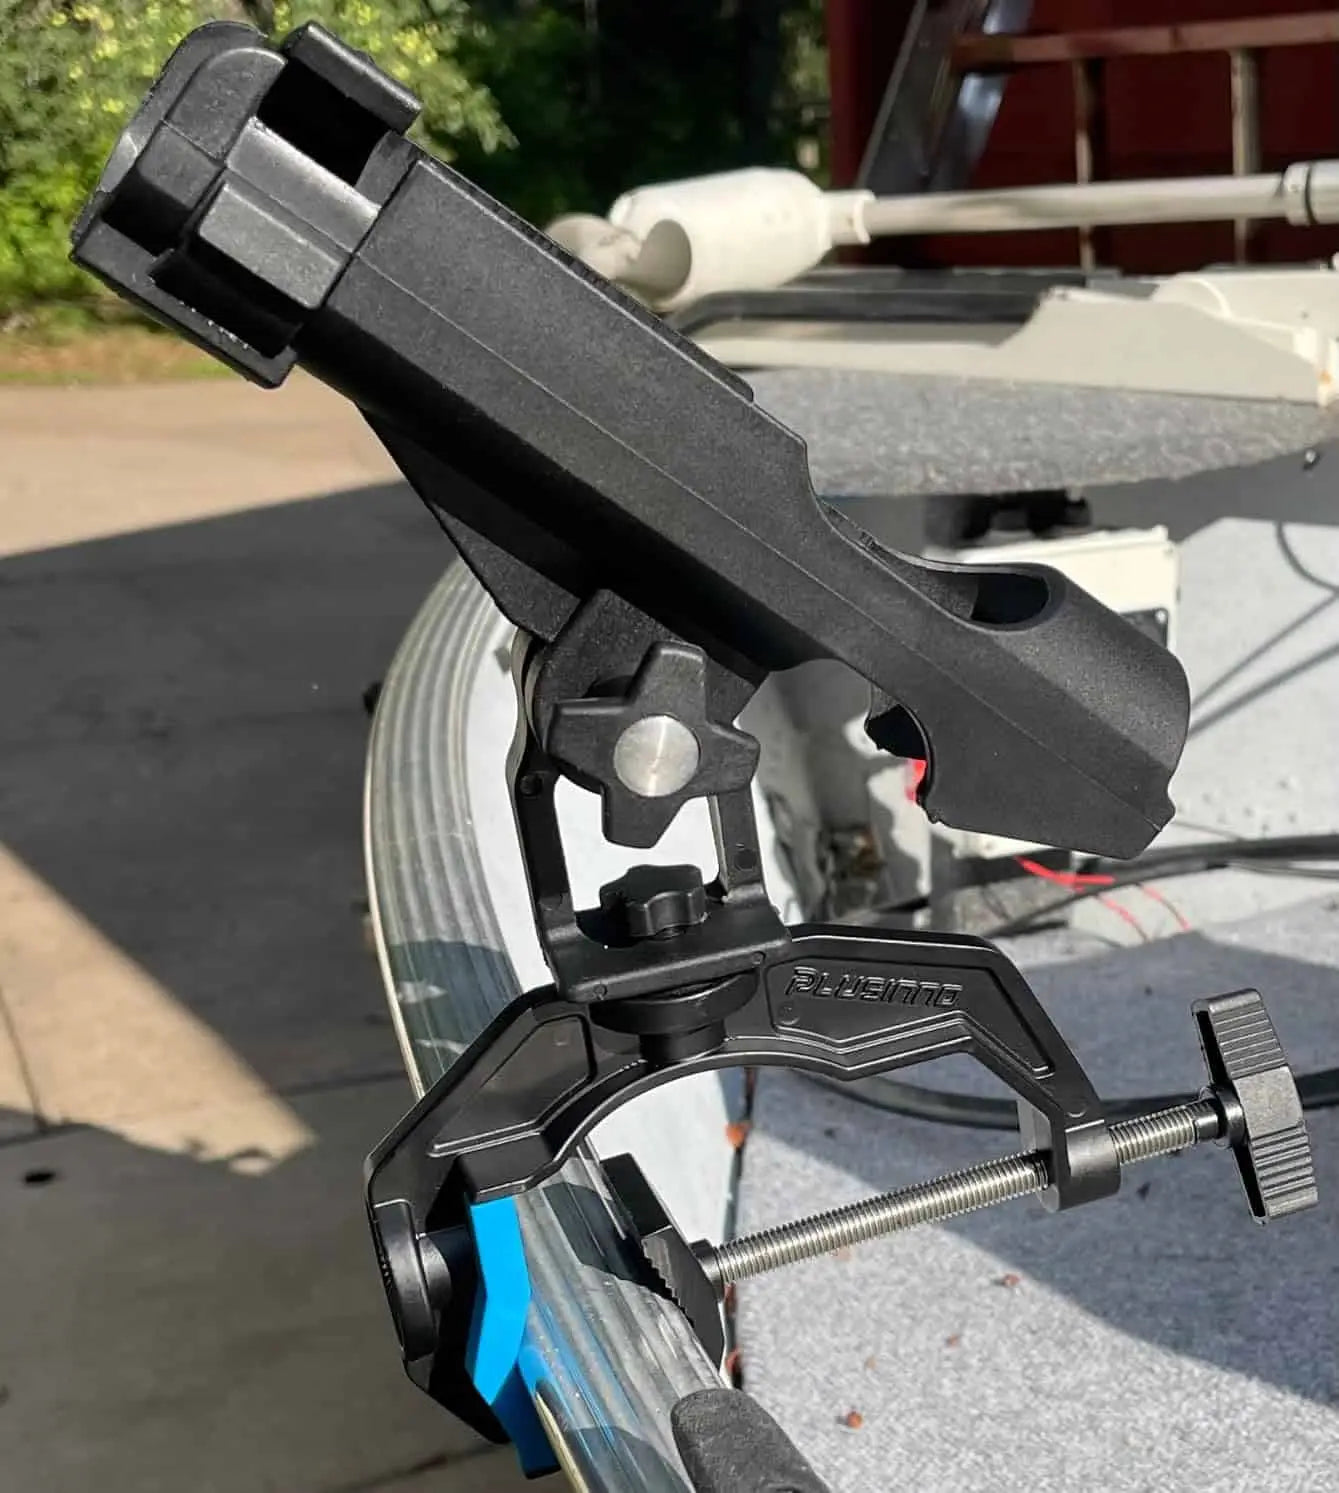 Where to Mount Rod Holders on a Boat?